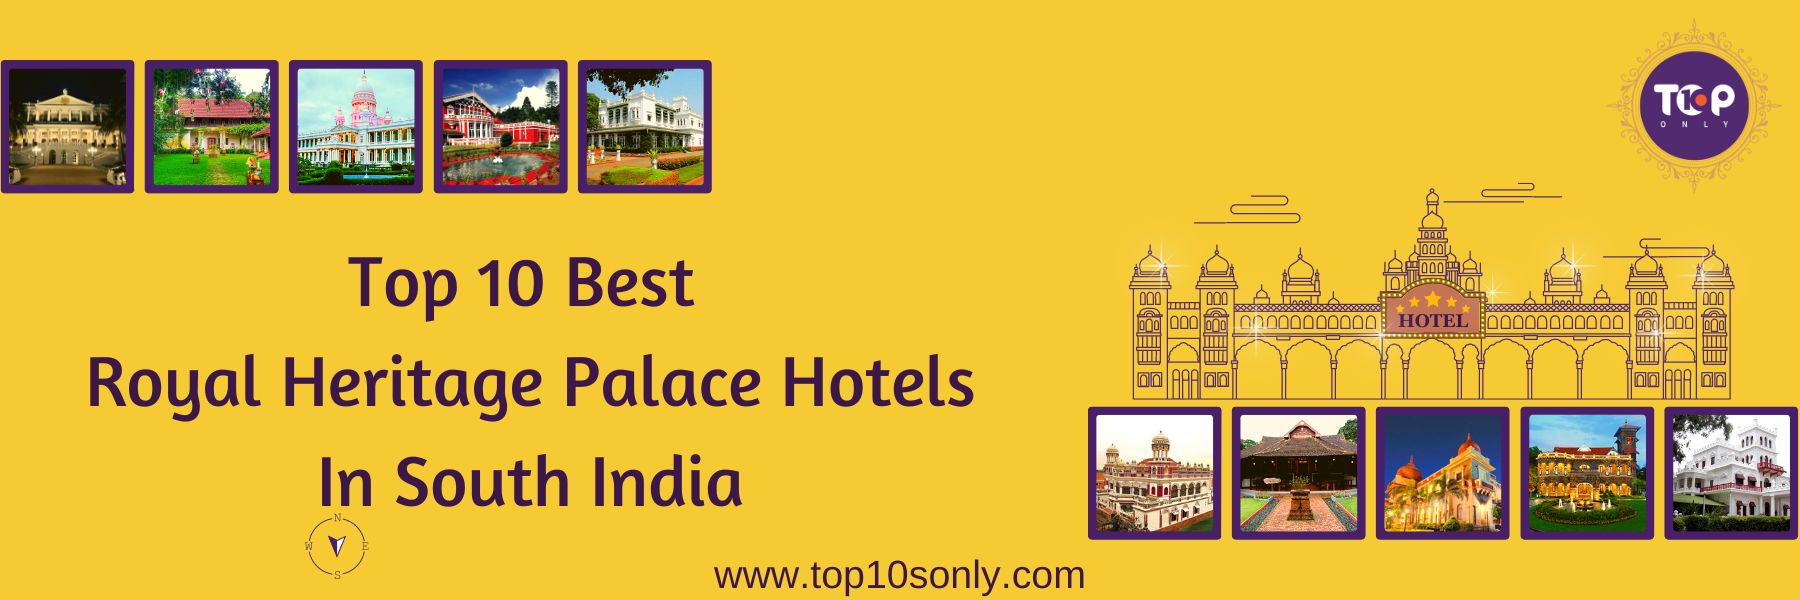 top 10 best royal heritage palace hotels in south india (1800x600)